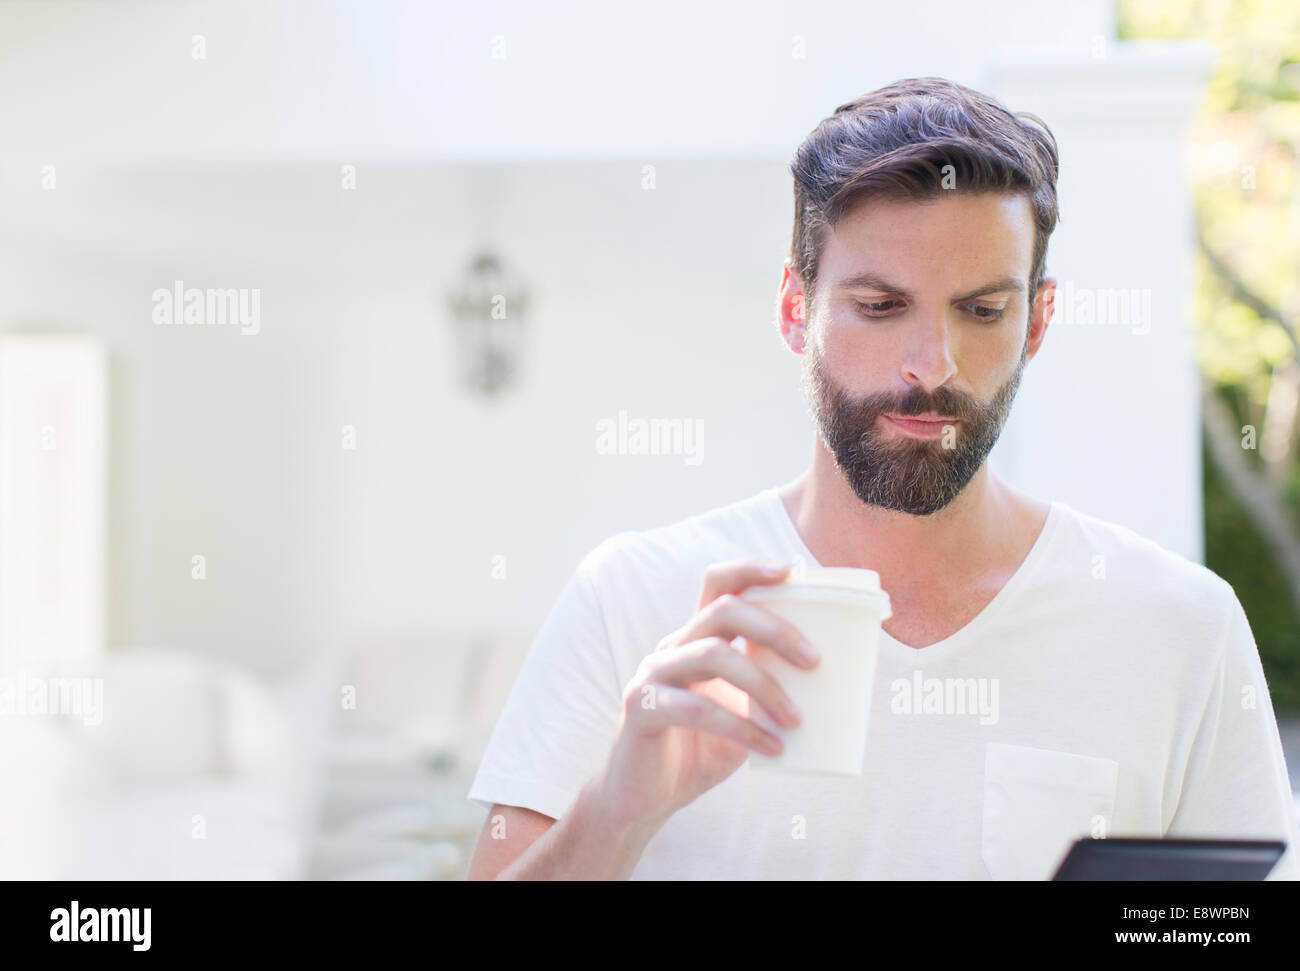 Man drinking coffee and using digital tablet Stock Photo